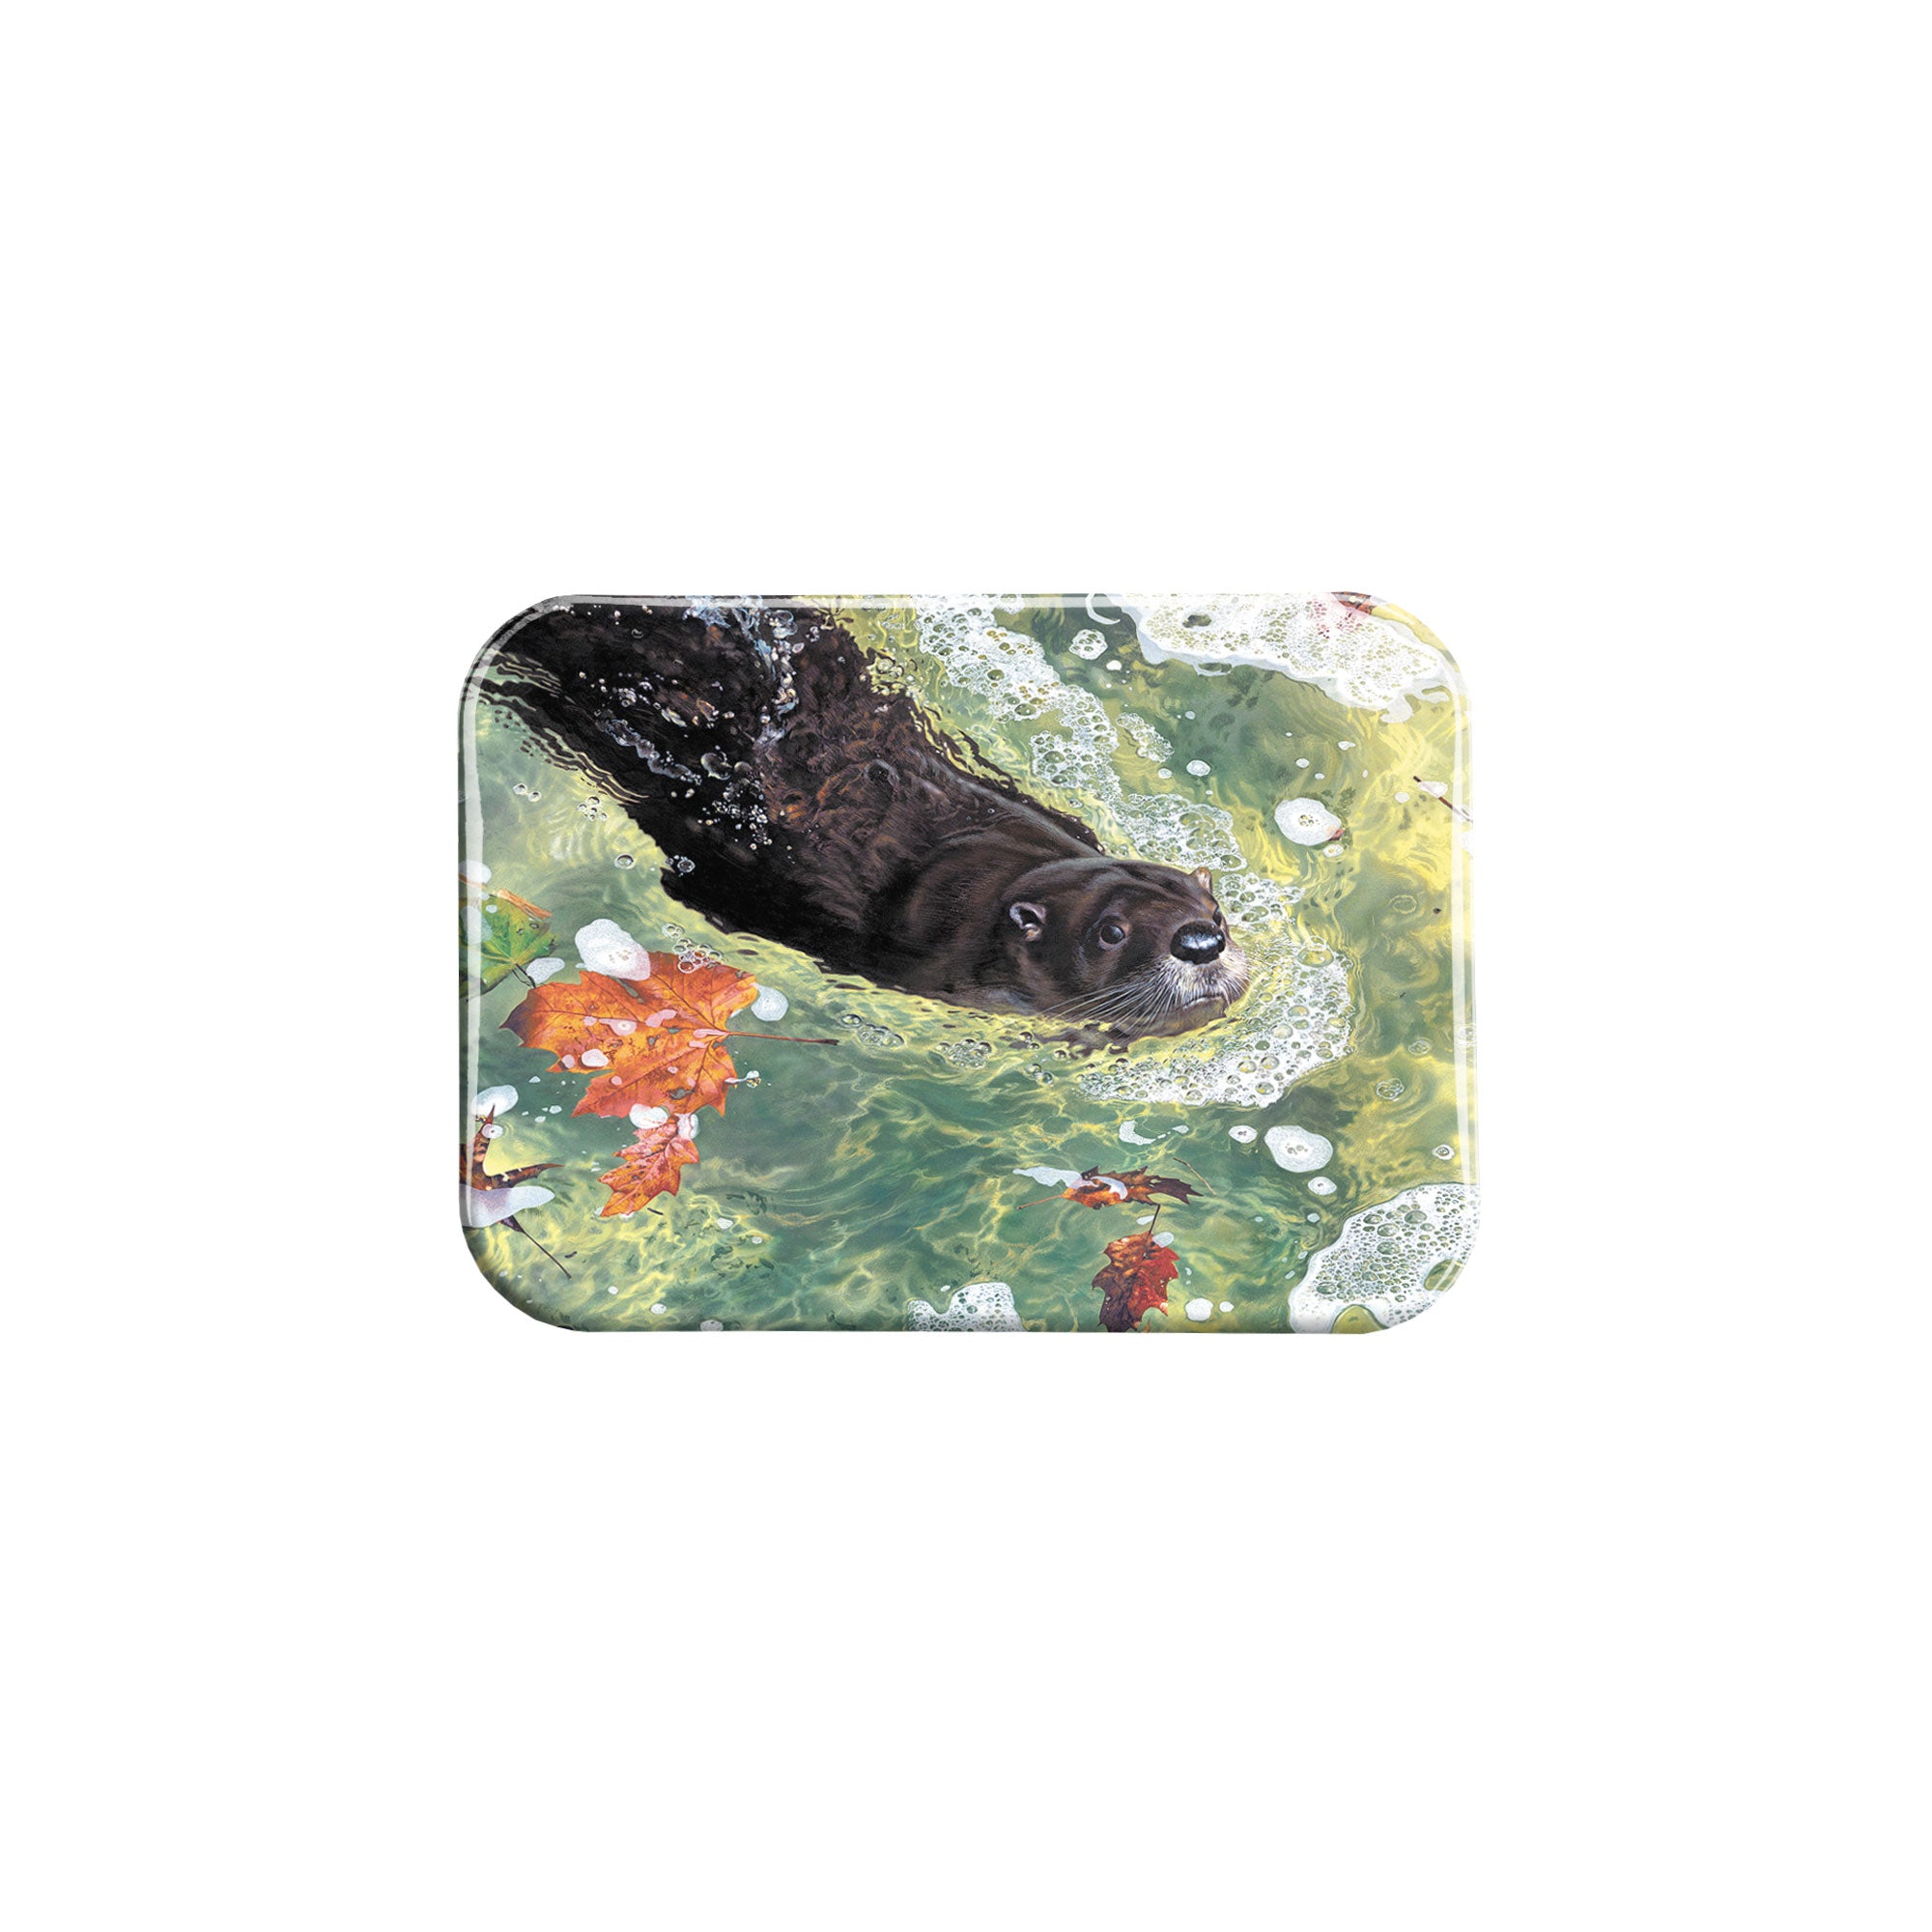 "On A Mission" - 2.5" X 3.5" Rectangle Fridge Magnets